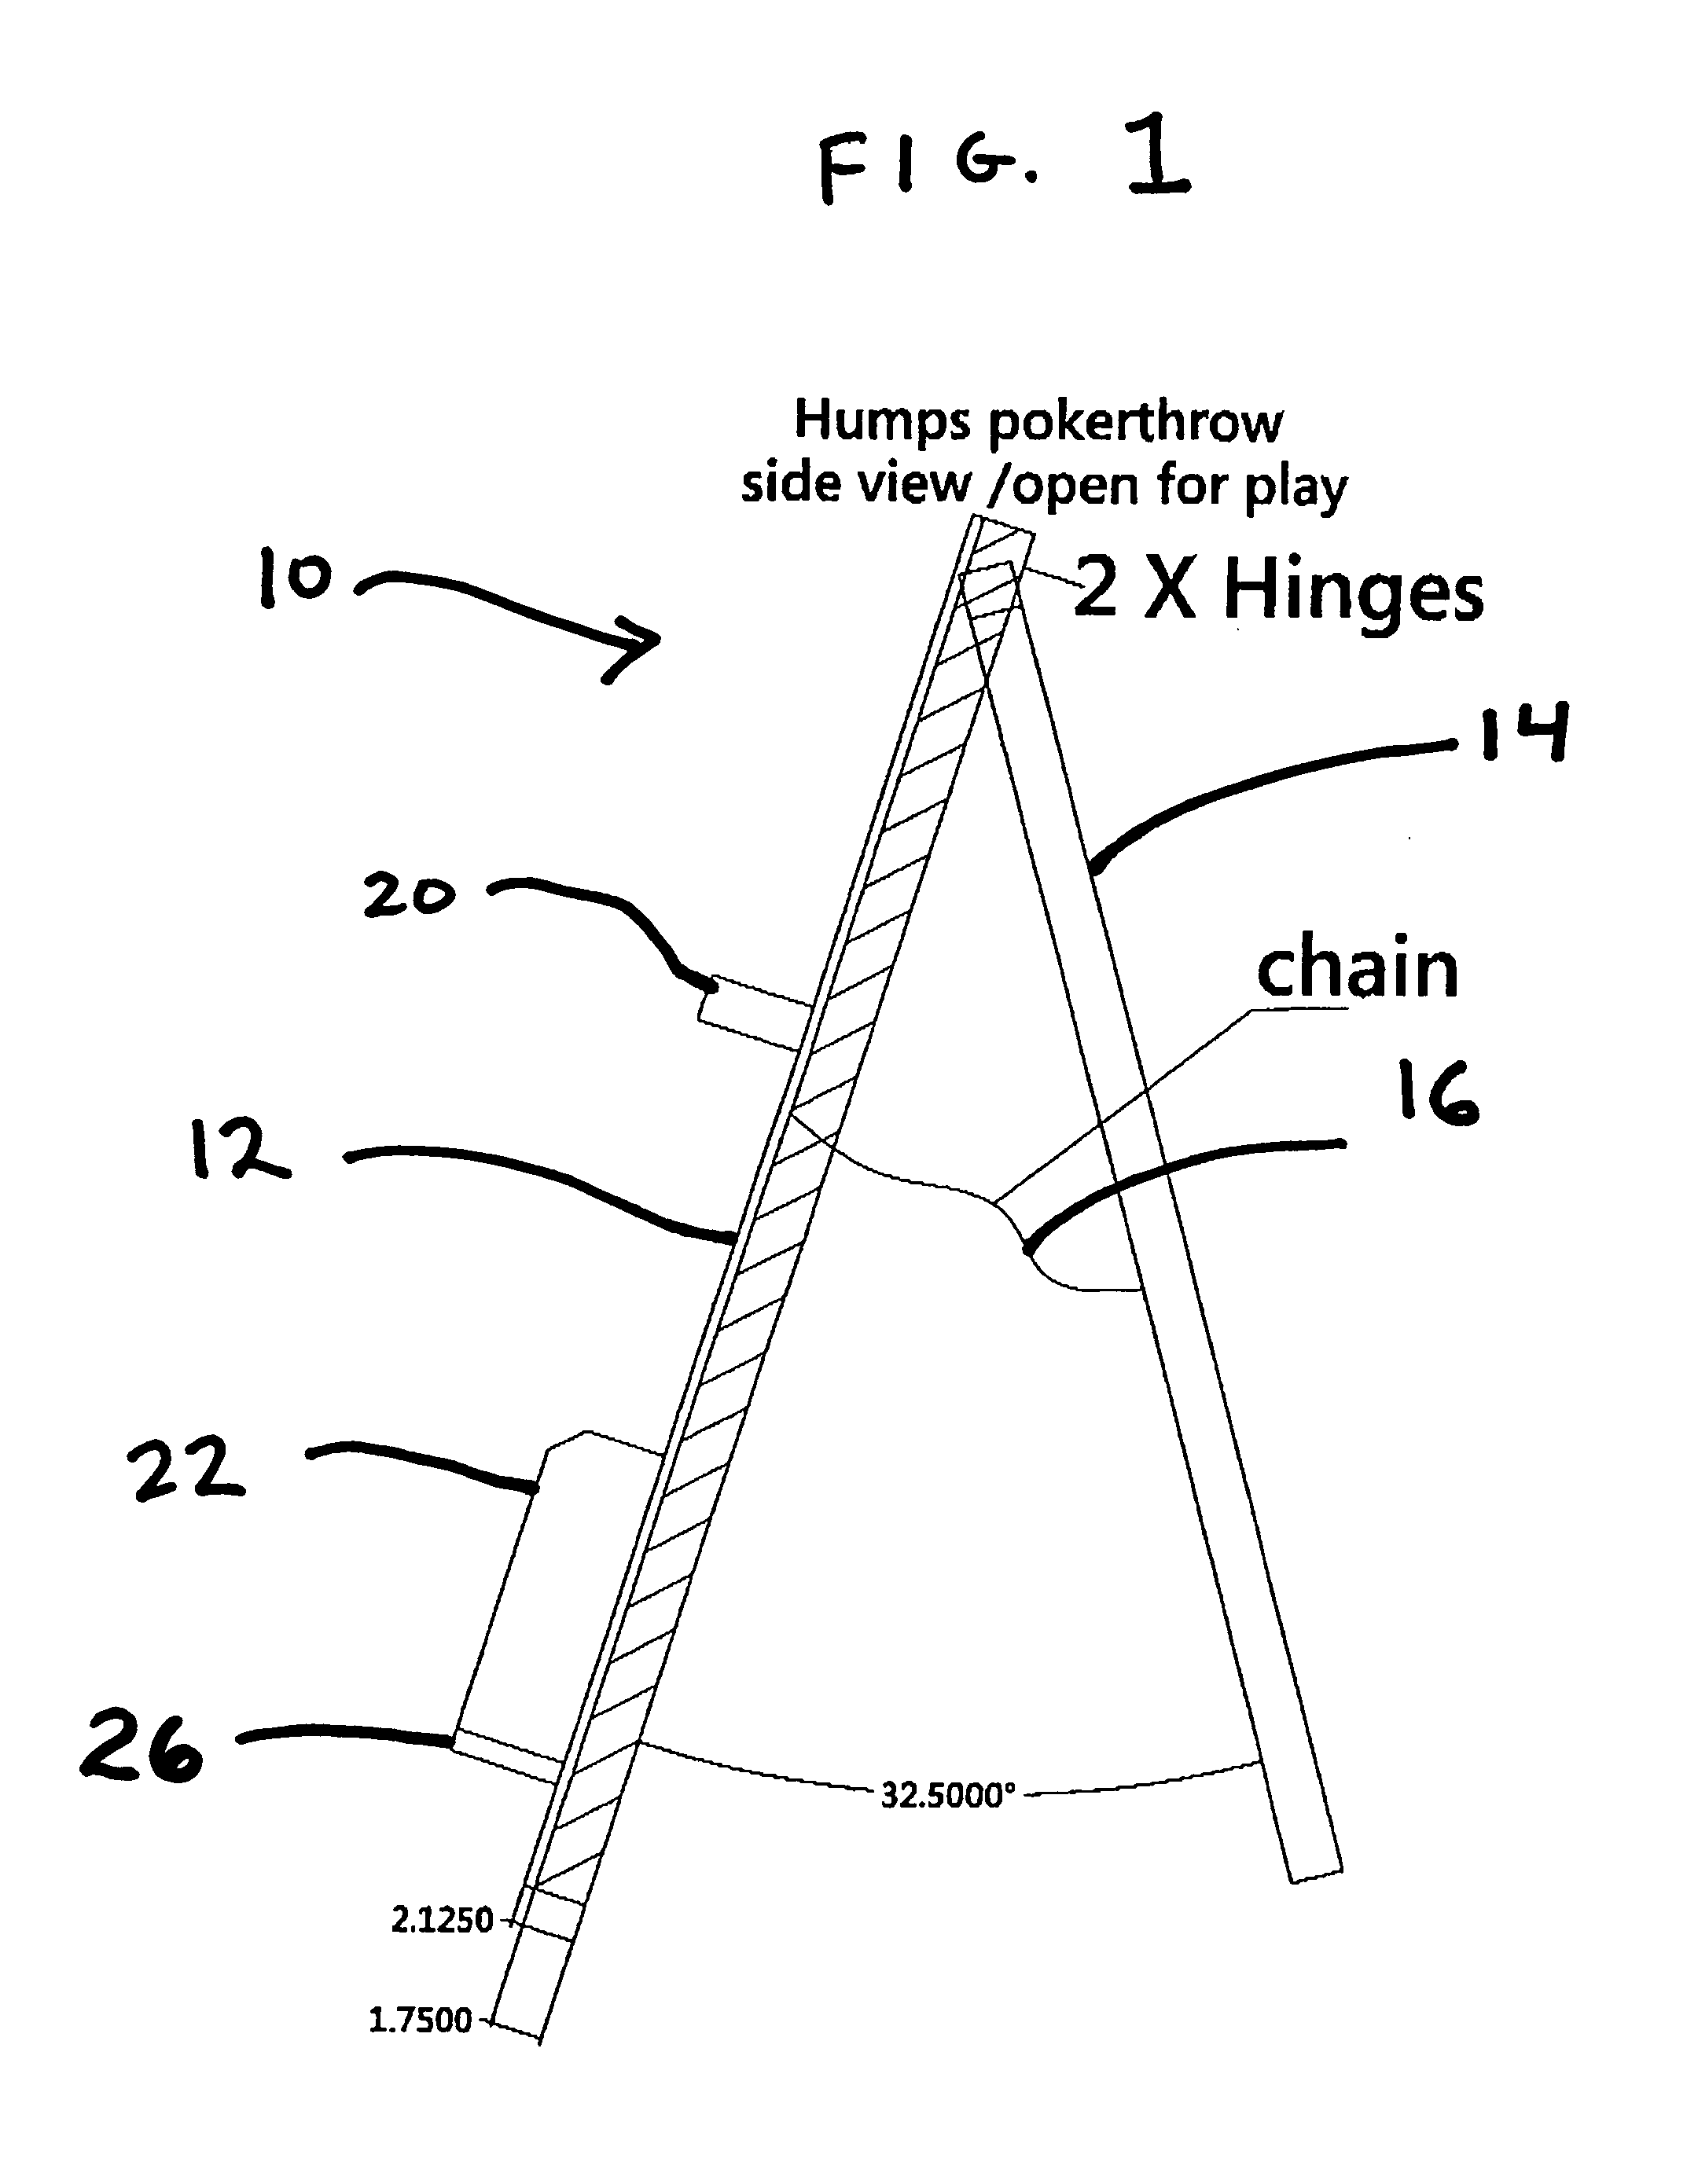 Method and apparatus for poker bag toss game